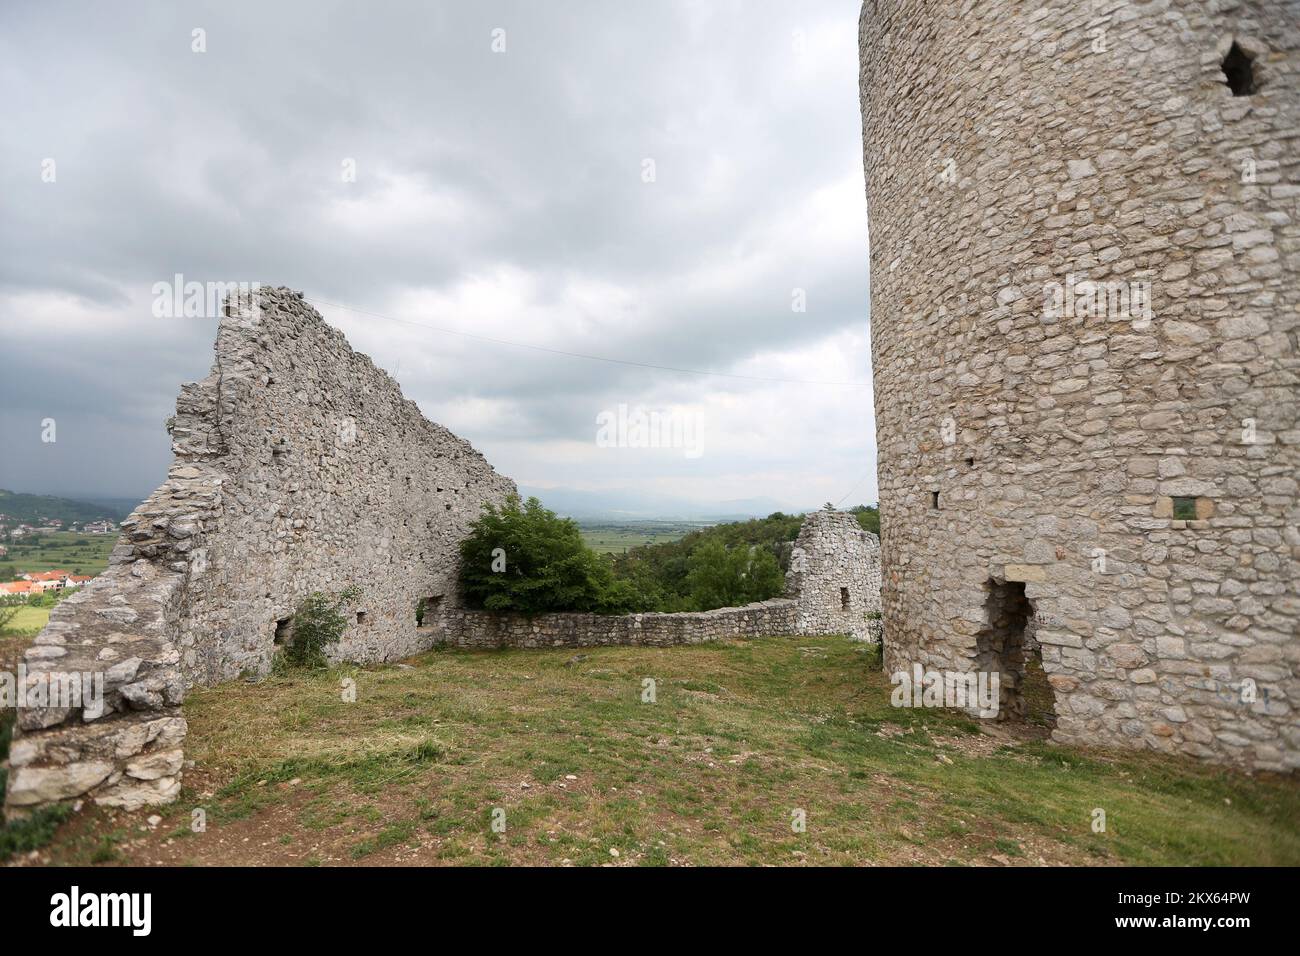 13.05.2018., Drnis , Croatia - The fortress Gradina is located in Drnis, at  an elevation of 344 m above sea level, above the canyon of the river  Cikola. Built on the site